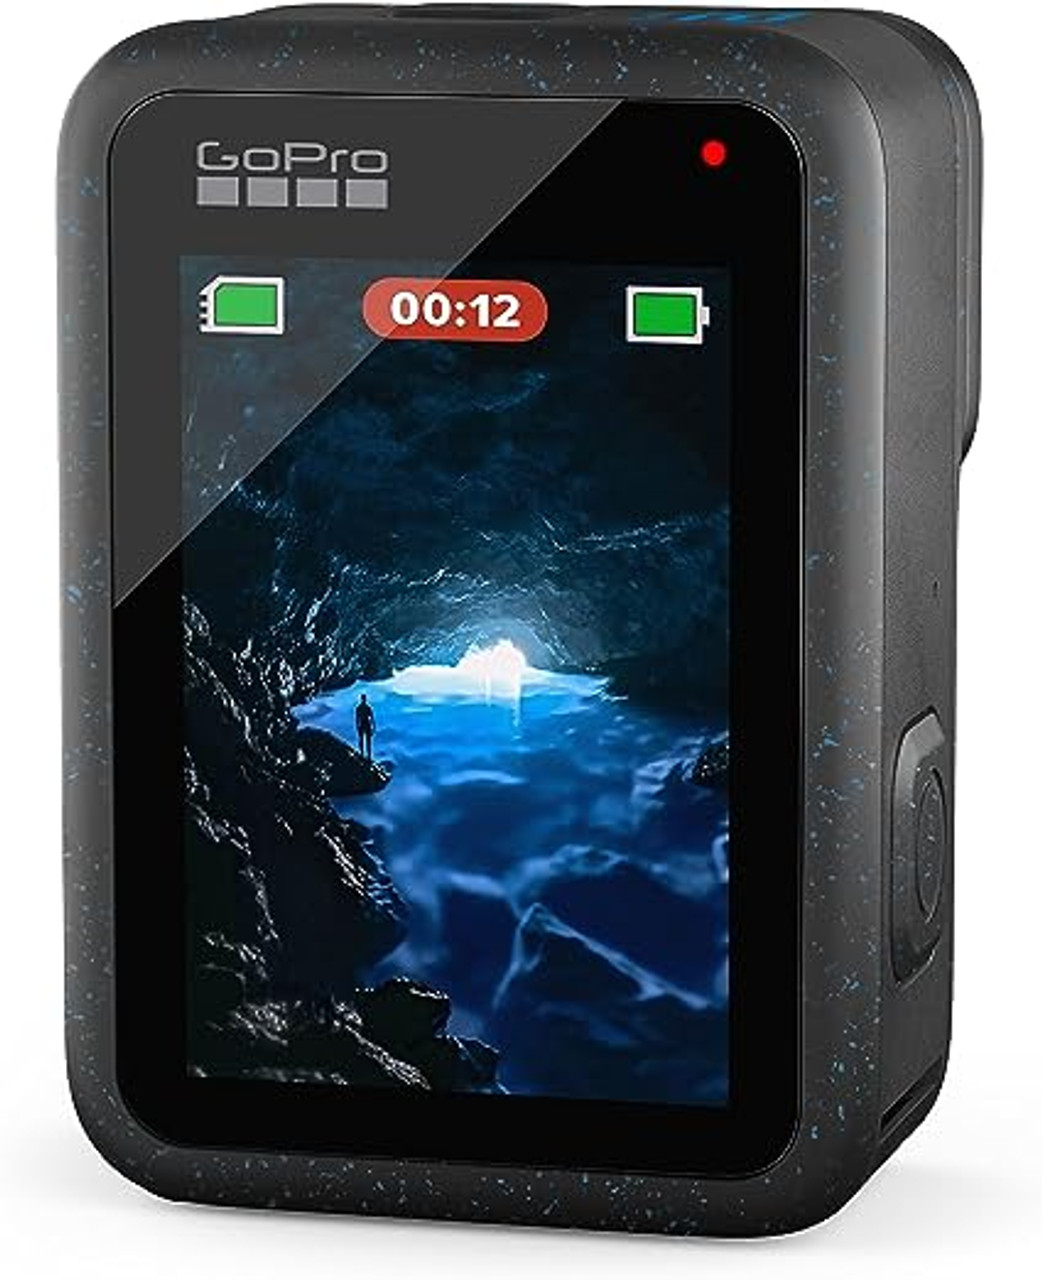 Camera Black Action HD HDR, 27MP Photos, - HERO12 GoPro Ultra 5.3K60 Waterproof Video, 1/ with